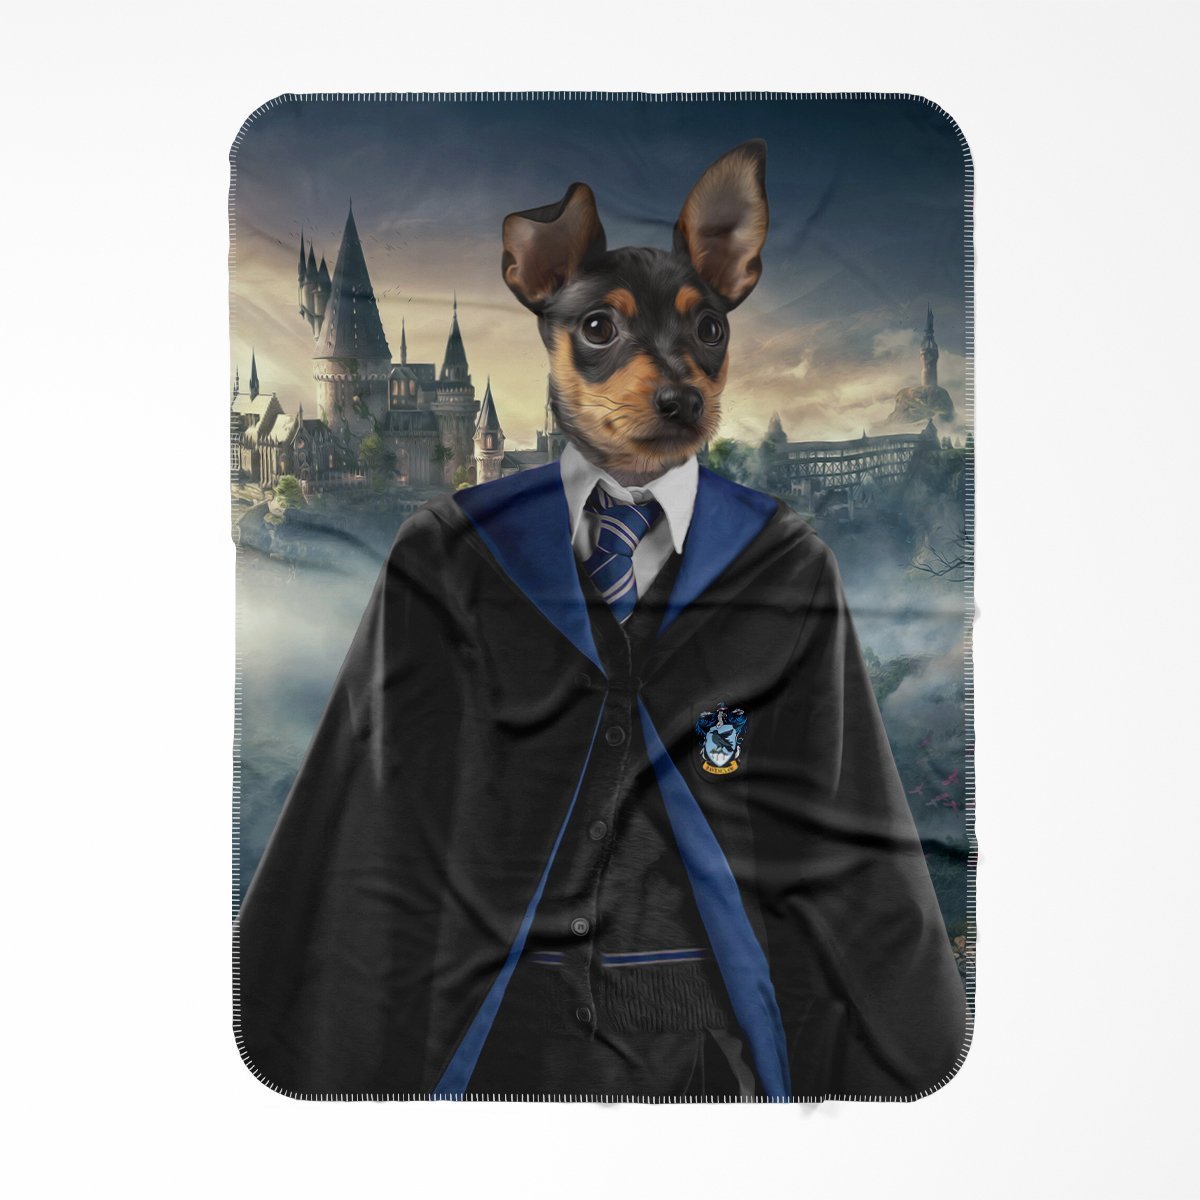 Ravenclaw (Harry Potter Inspired): Custom Pet Blanket - Paw & Glory - #pet portraits# - #dog portraits# - #pet portraits uk#Pawandglory, Pet art blanket,dog blanket embroidered, fleece blanket for dogs, make your own dog blanket, put your dog's face on a blanket, blankets with pets pictures on them, dog blanket custom